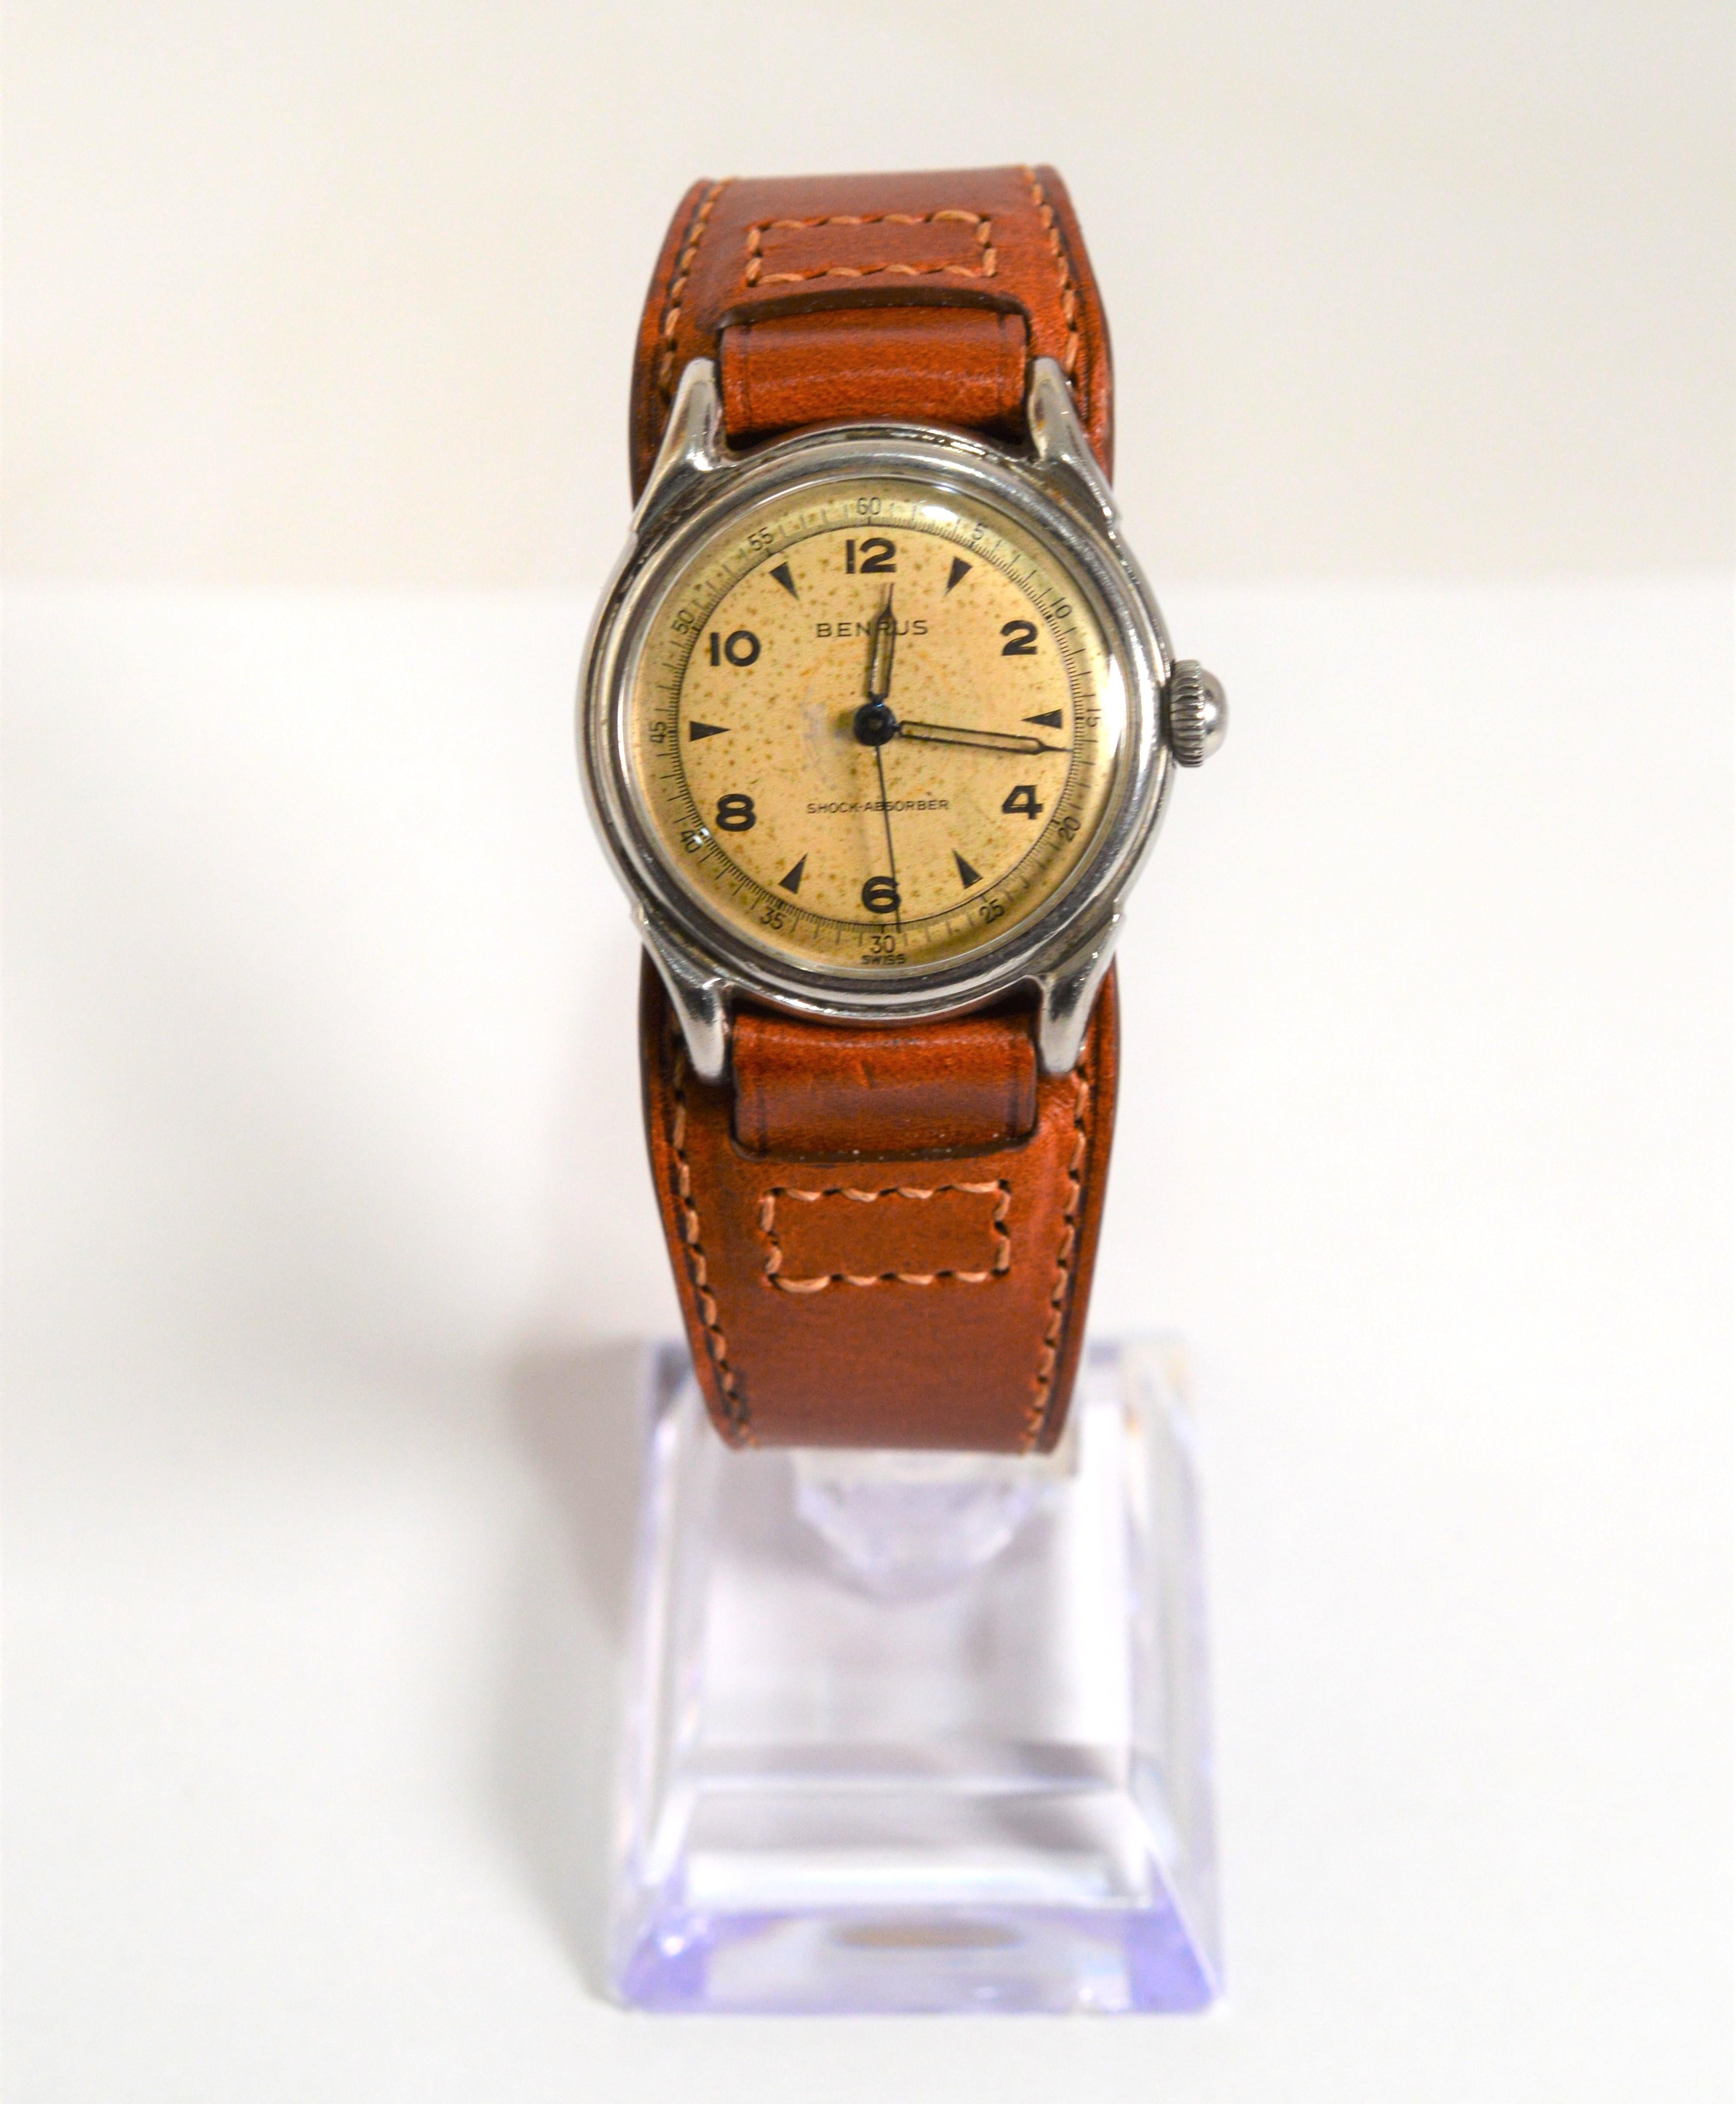 Vintage Benrus Military Style Wrist Watch with Leather Bund Strap For Sale 2